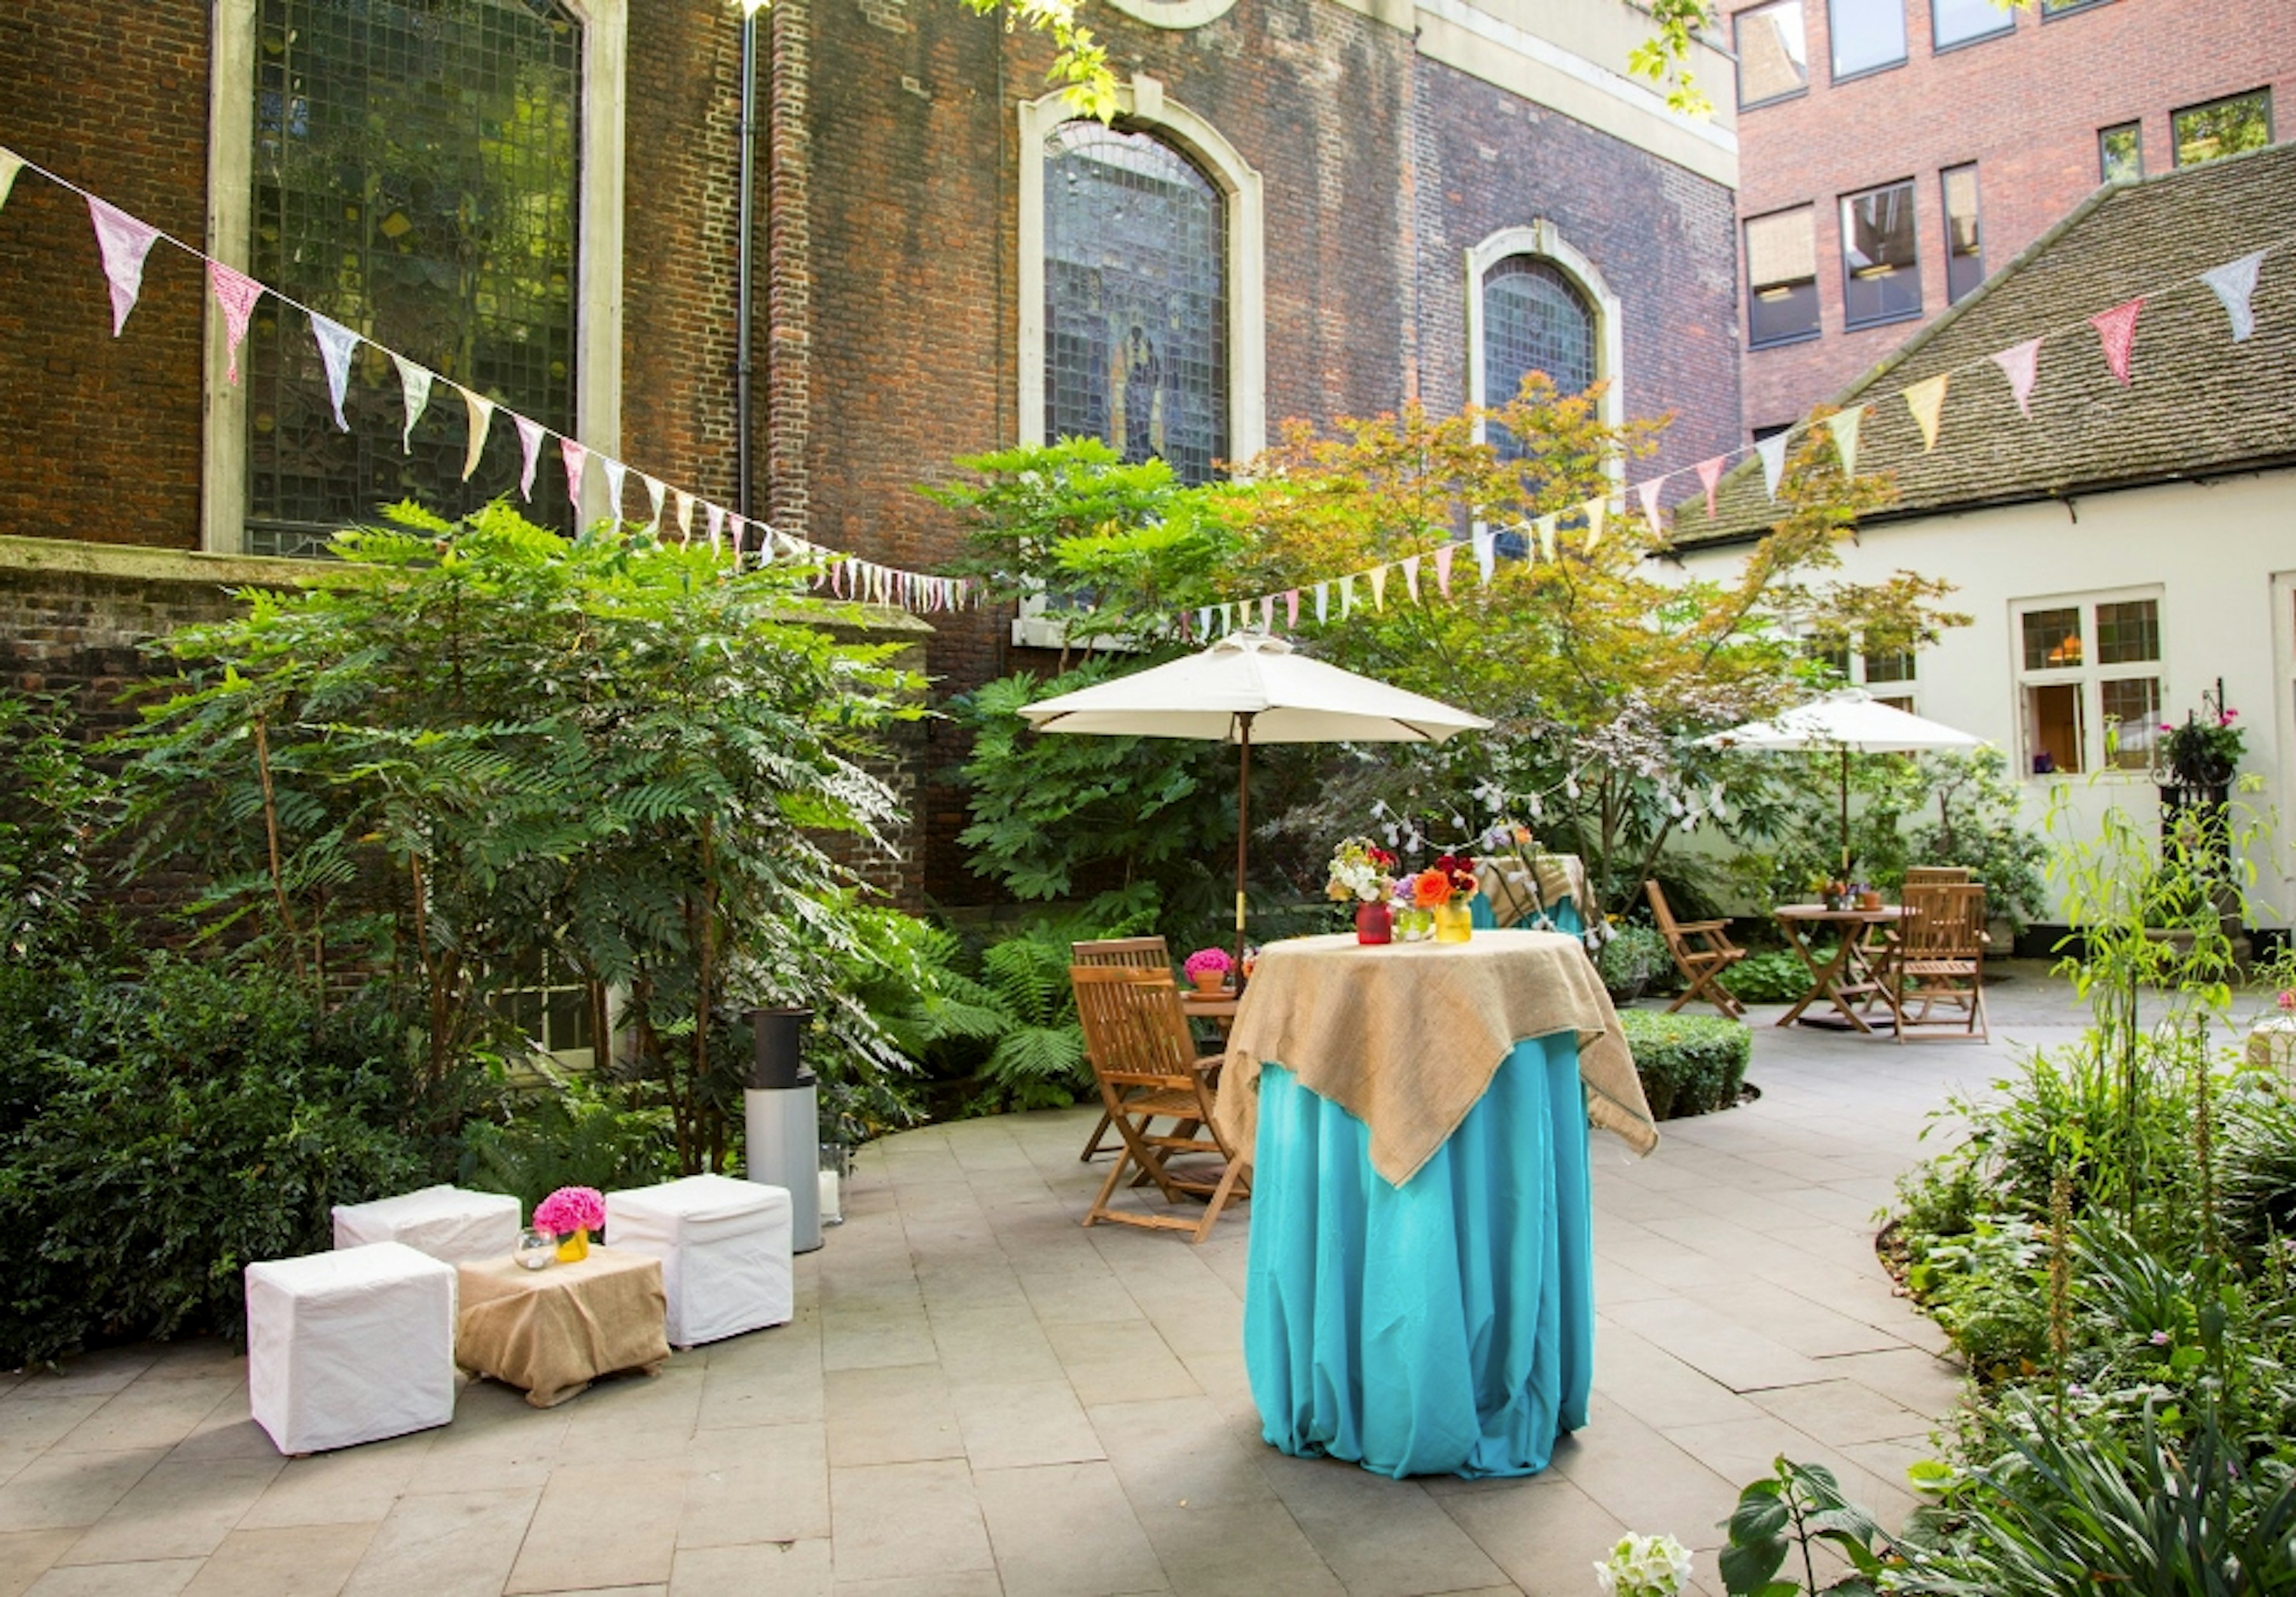 Events - Stationers' Hall and Garden